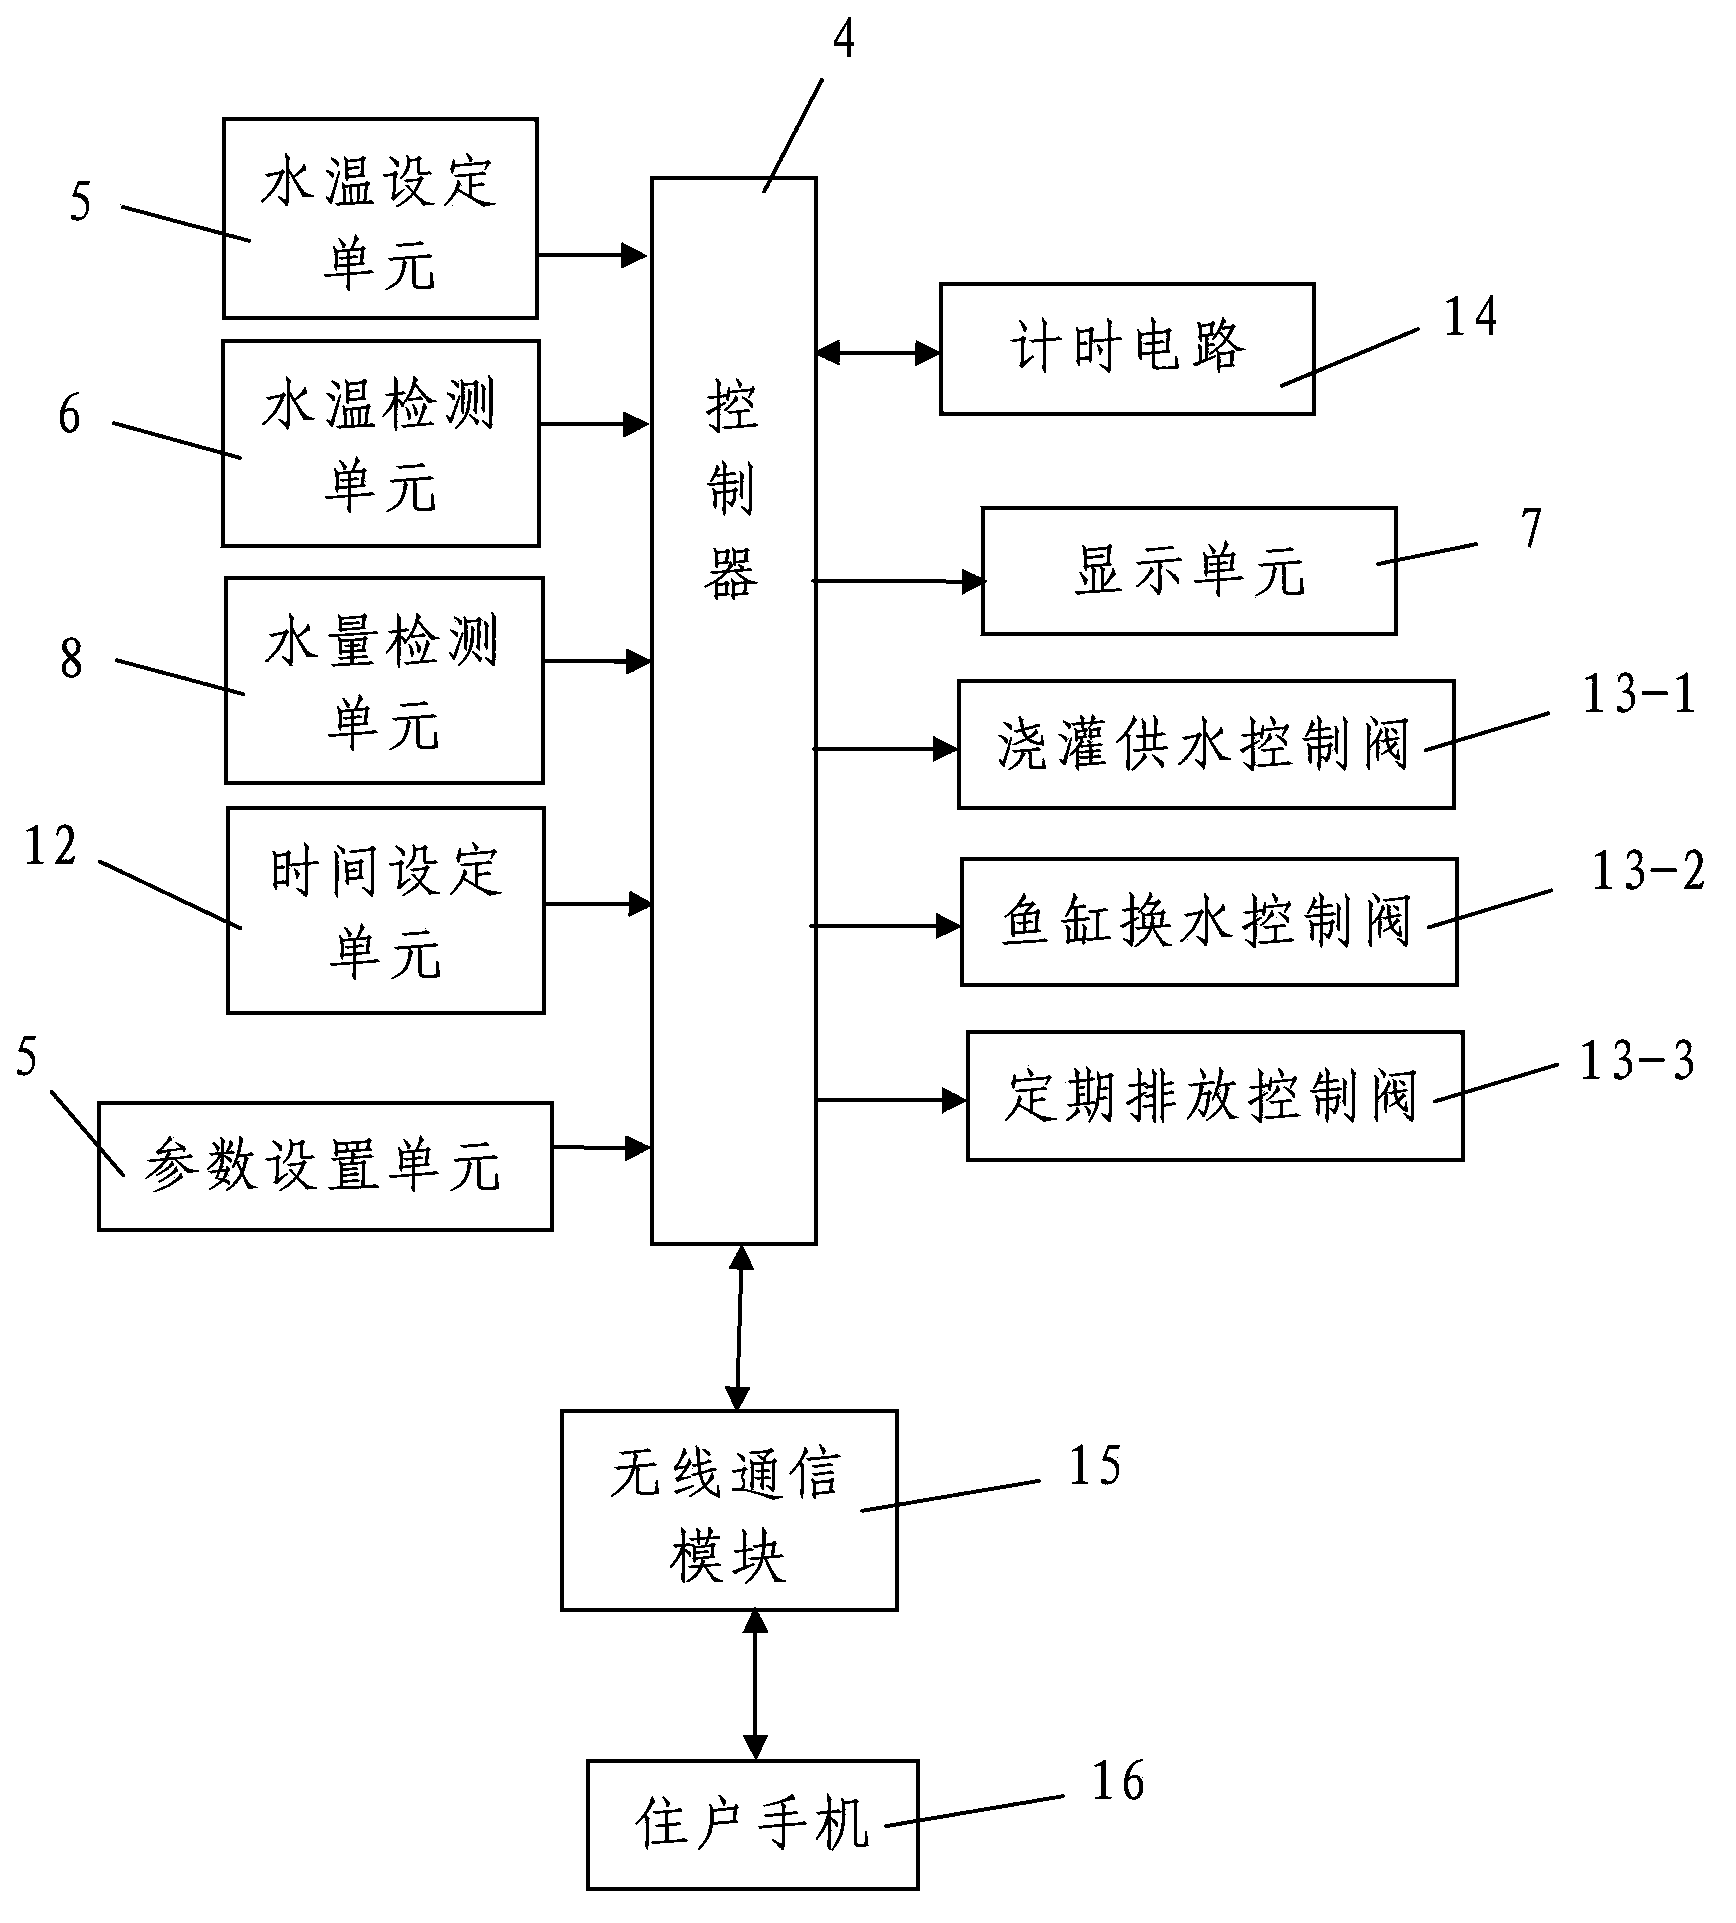 Condensate water recycling and reusing device for air conditioner